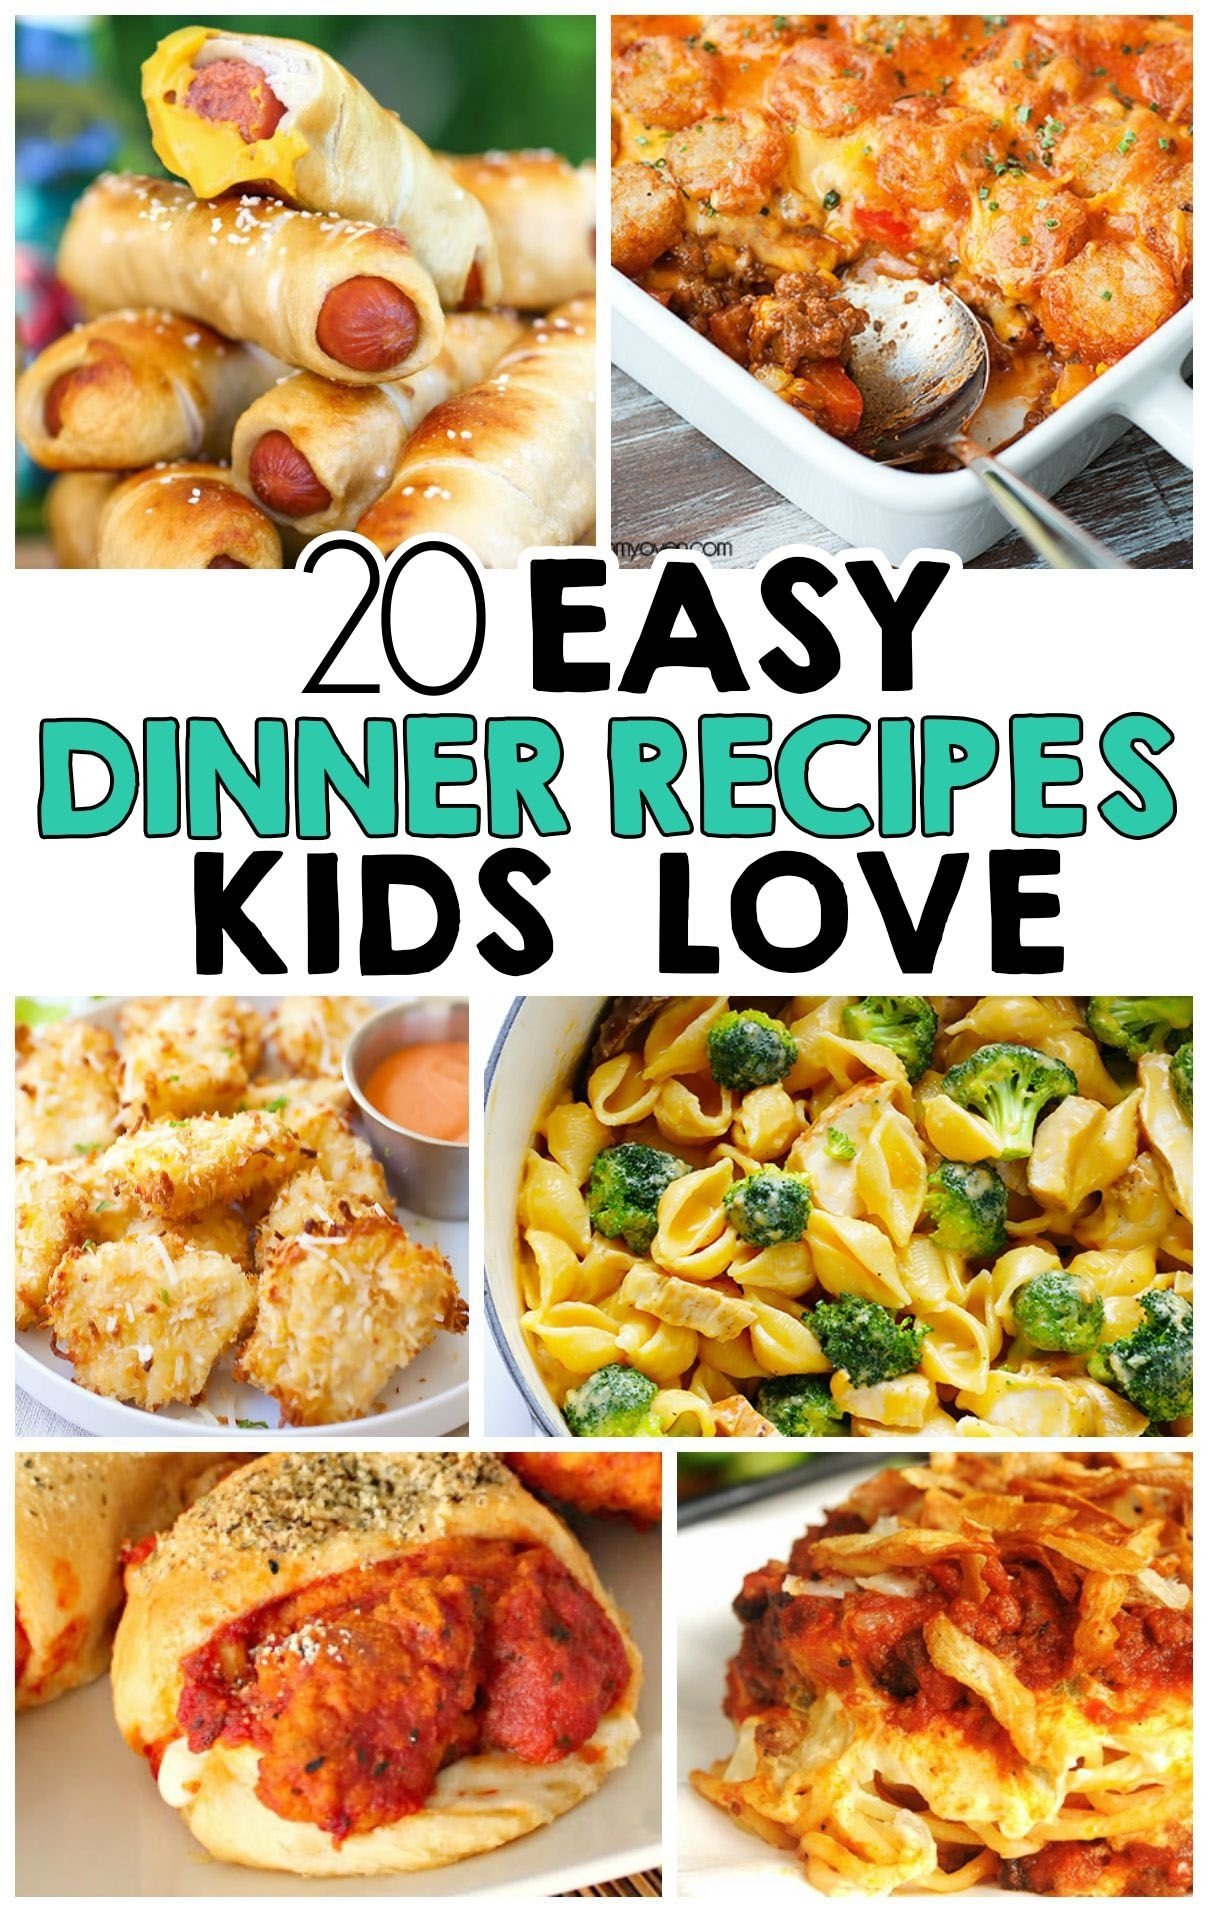 10 Fabulous Cheap Dinner Ideas For Kids 20 easy dinner recipes that kids love dinners easy and recipes 6 2022